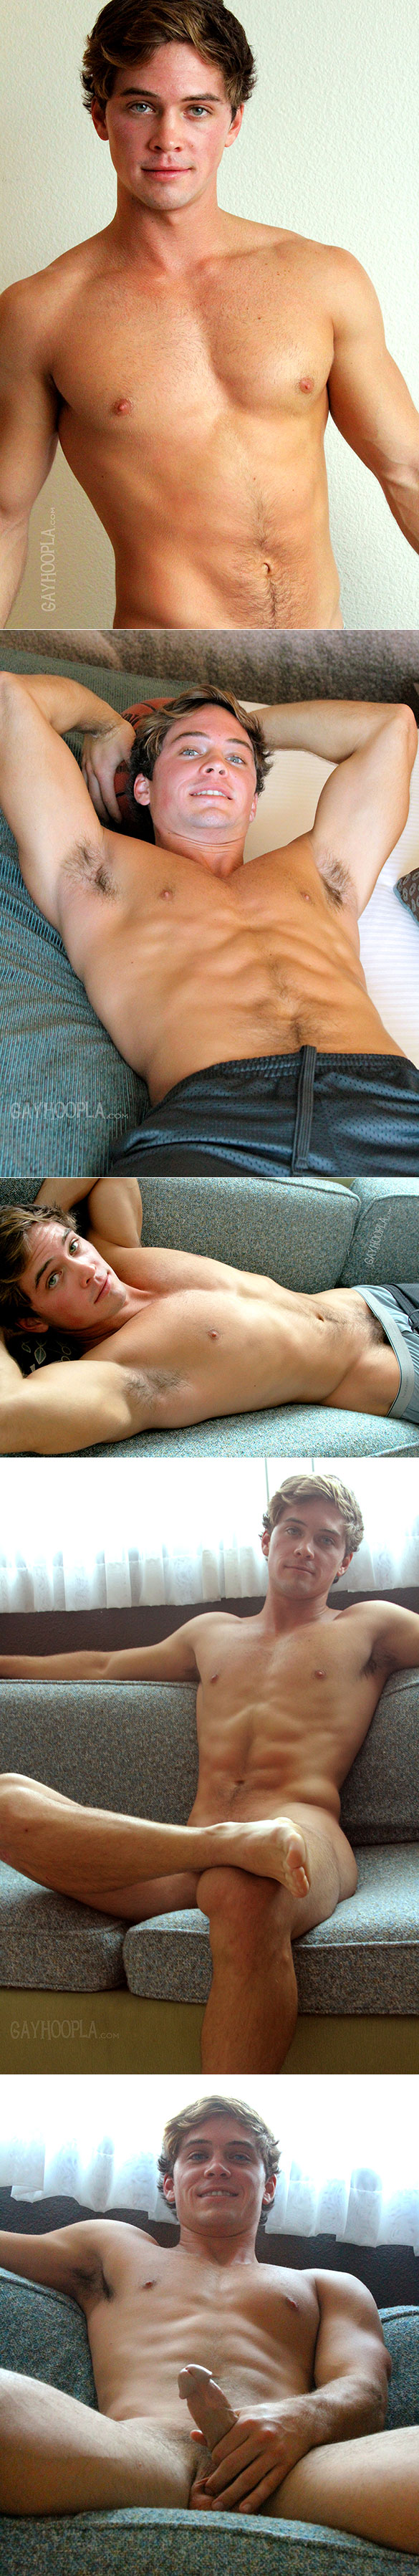 GayHoopla: Andy Sheckler busts a nut